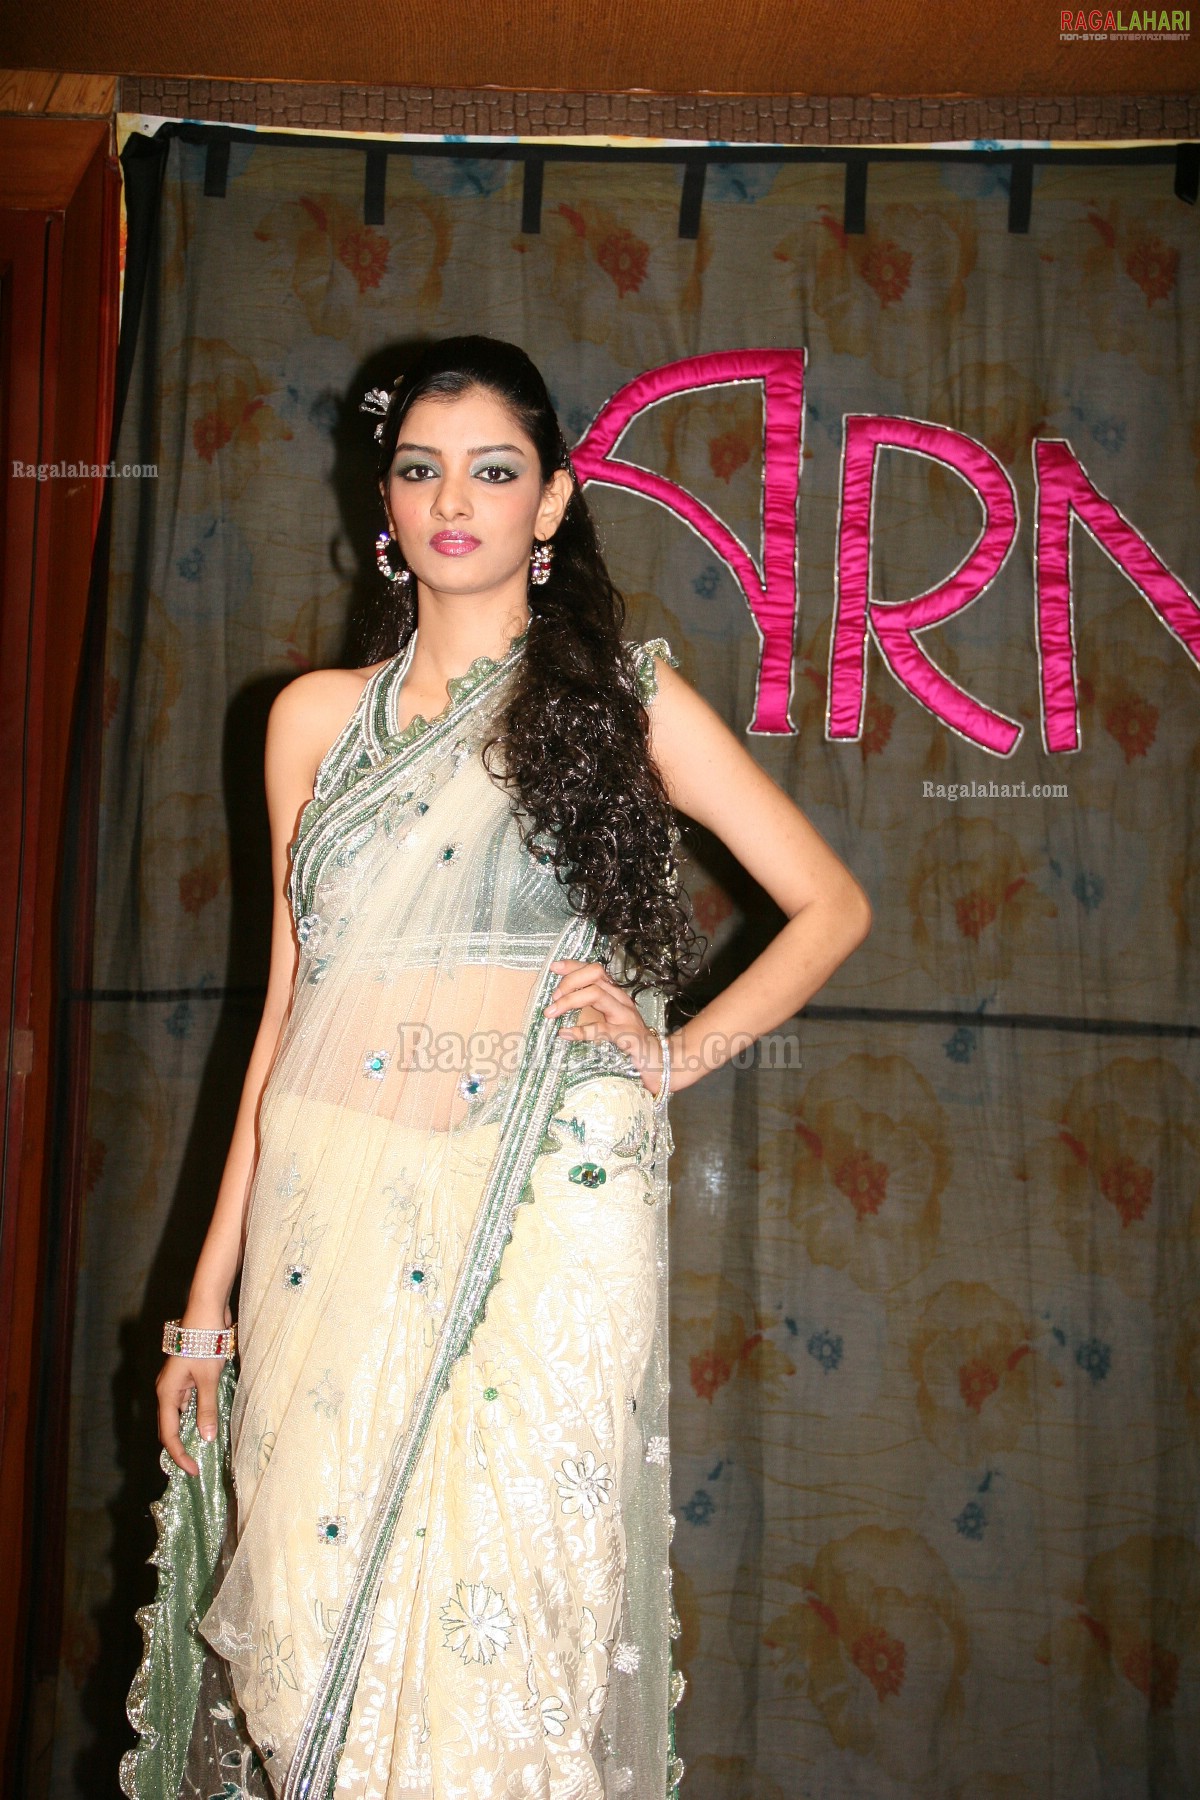 Sonia's New Collection 'Fusion' Launched at Arnia